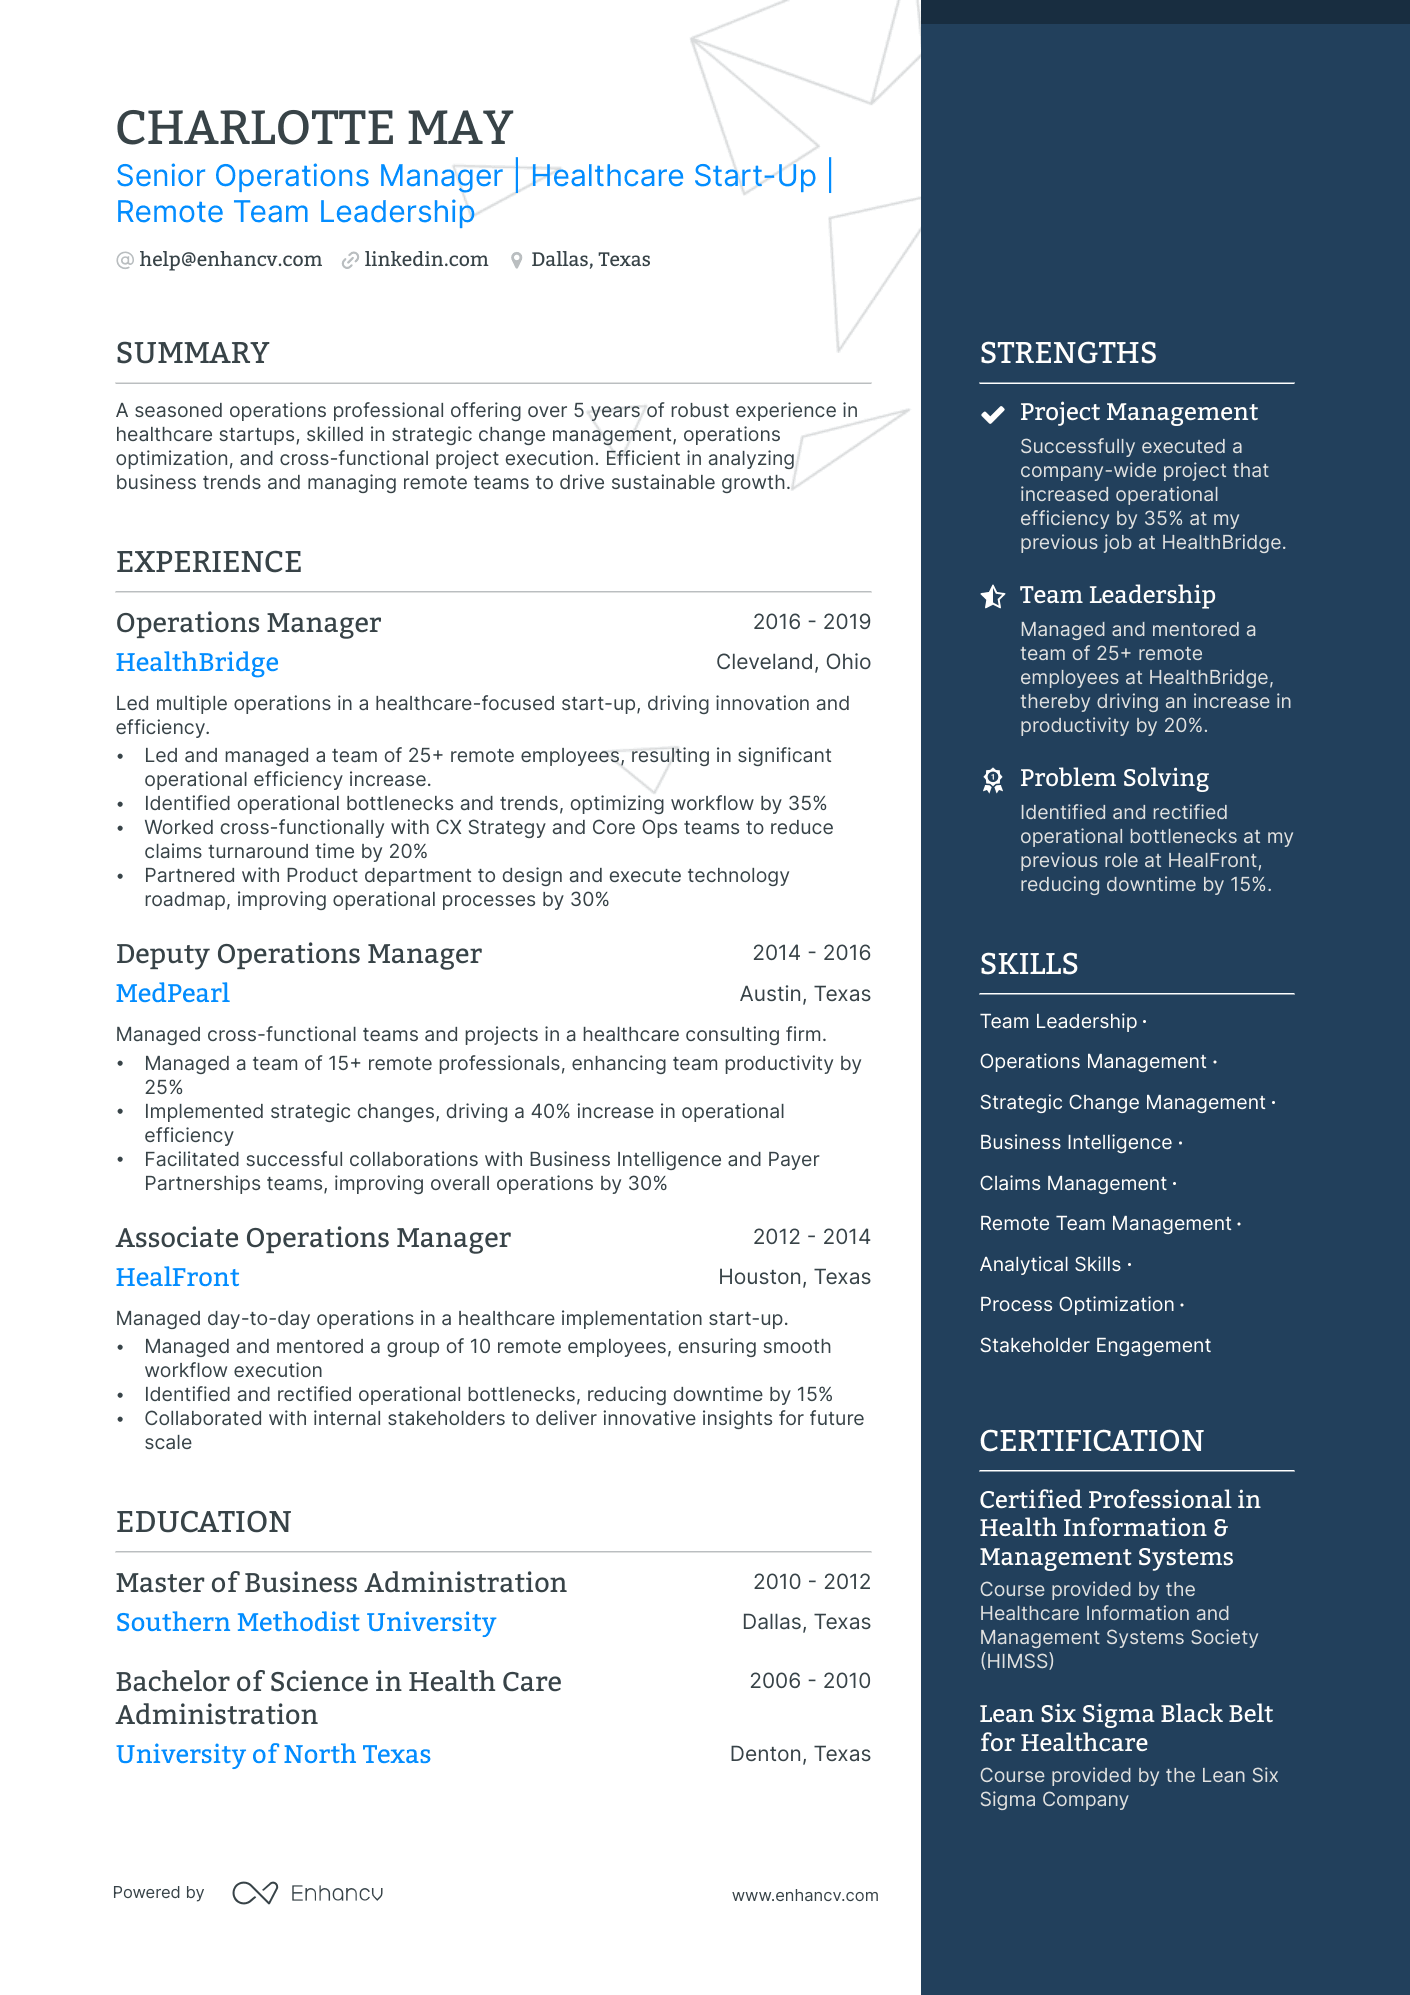 Senior Operations Manager resume example